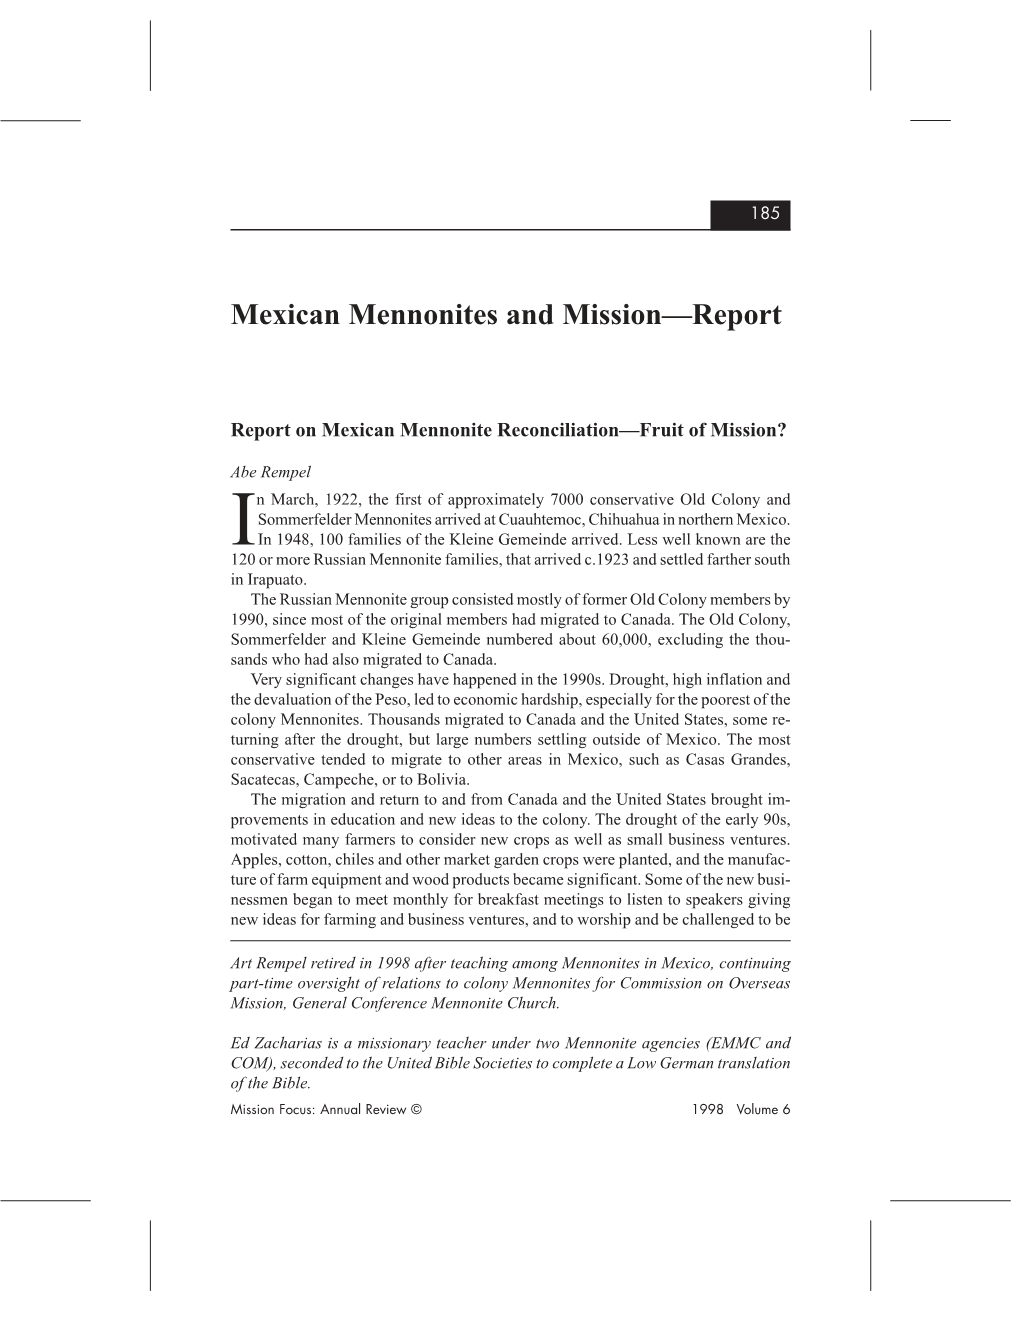 Mexican Mennonites and Mission—Report